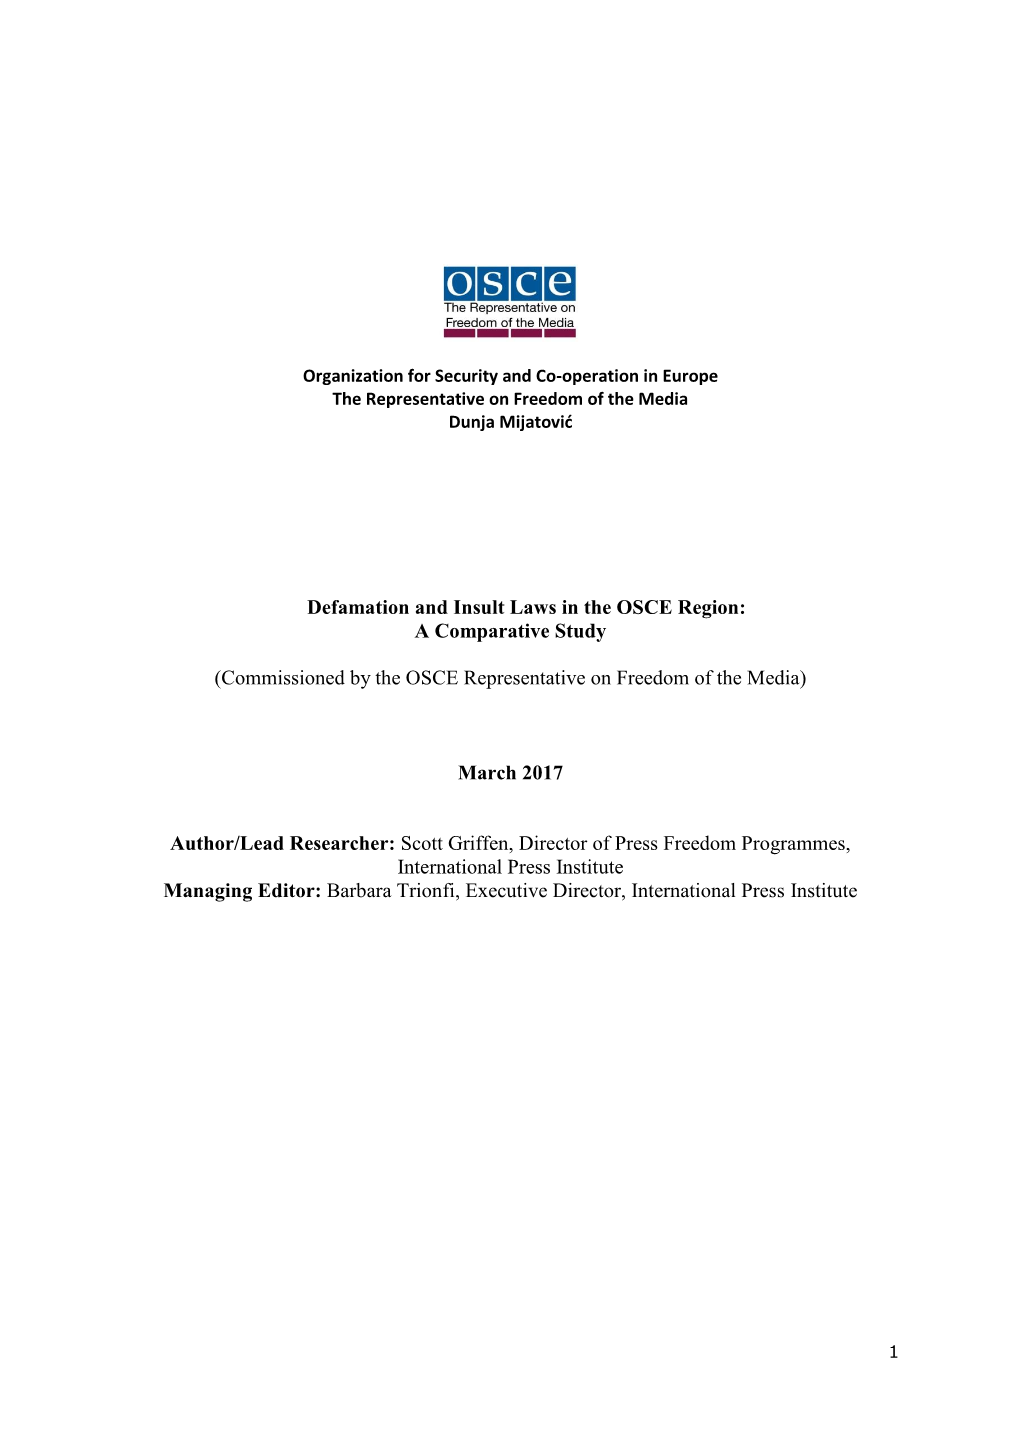 Defamation and Insult Laws in the OSCE Region: a Comparative Study